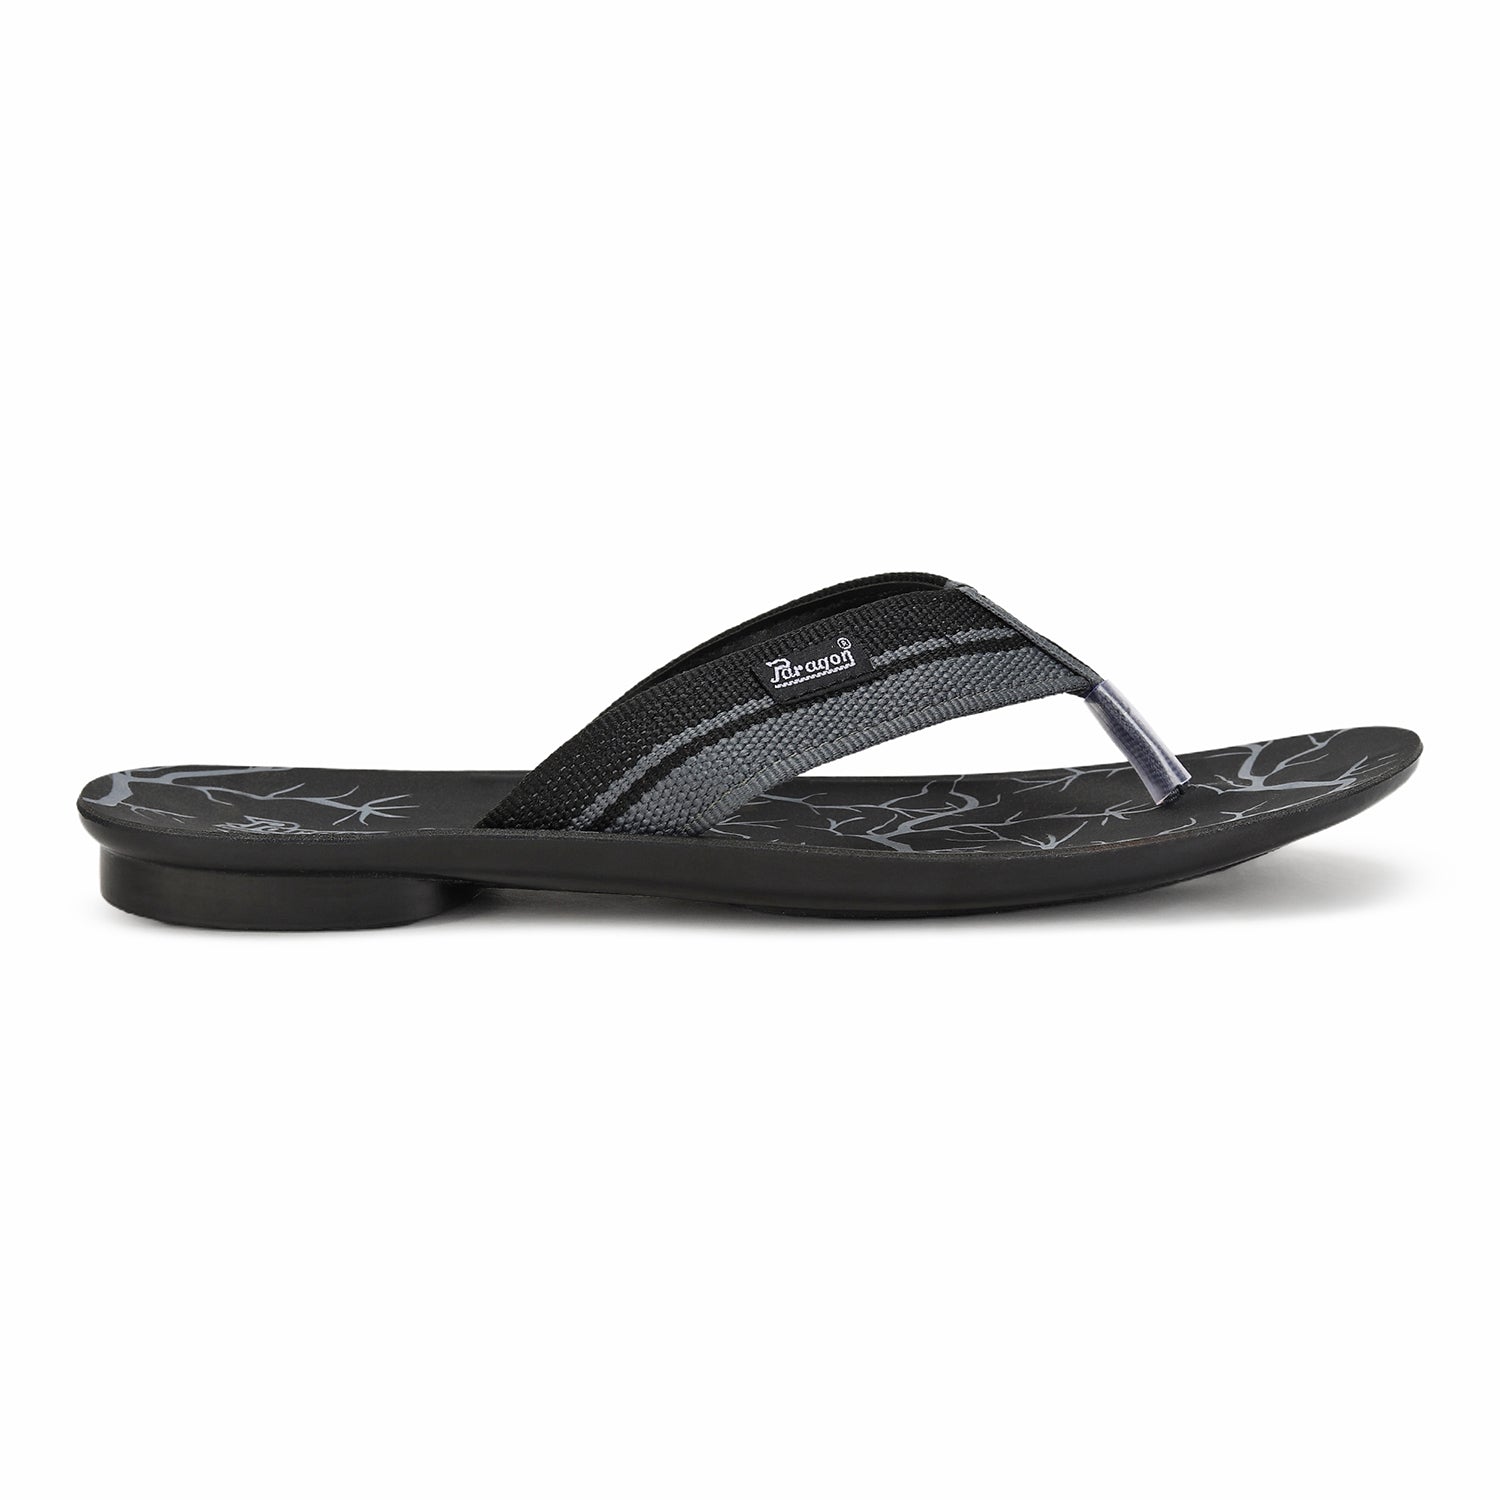 Paragon PUK2201G Men Stylish Sandals | Comfortable Sandals for Daily Outdoor Use | Casual Formal Sandals with Cushioned Soles